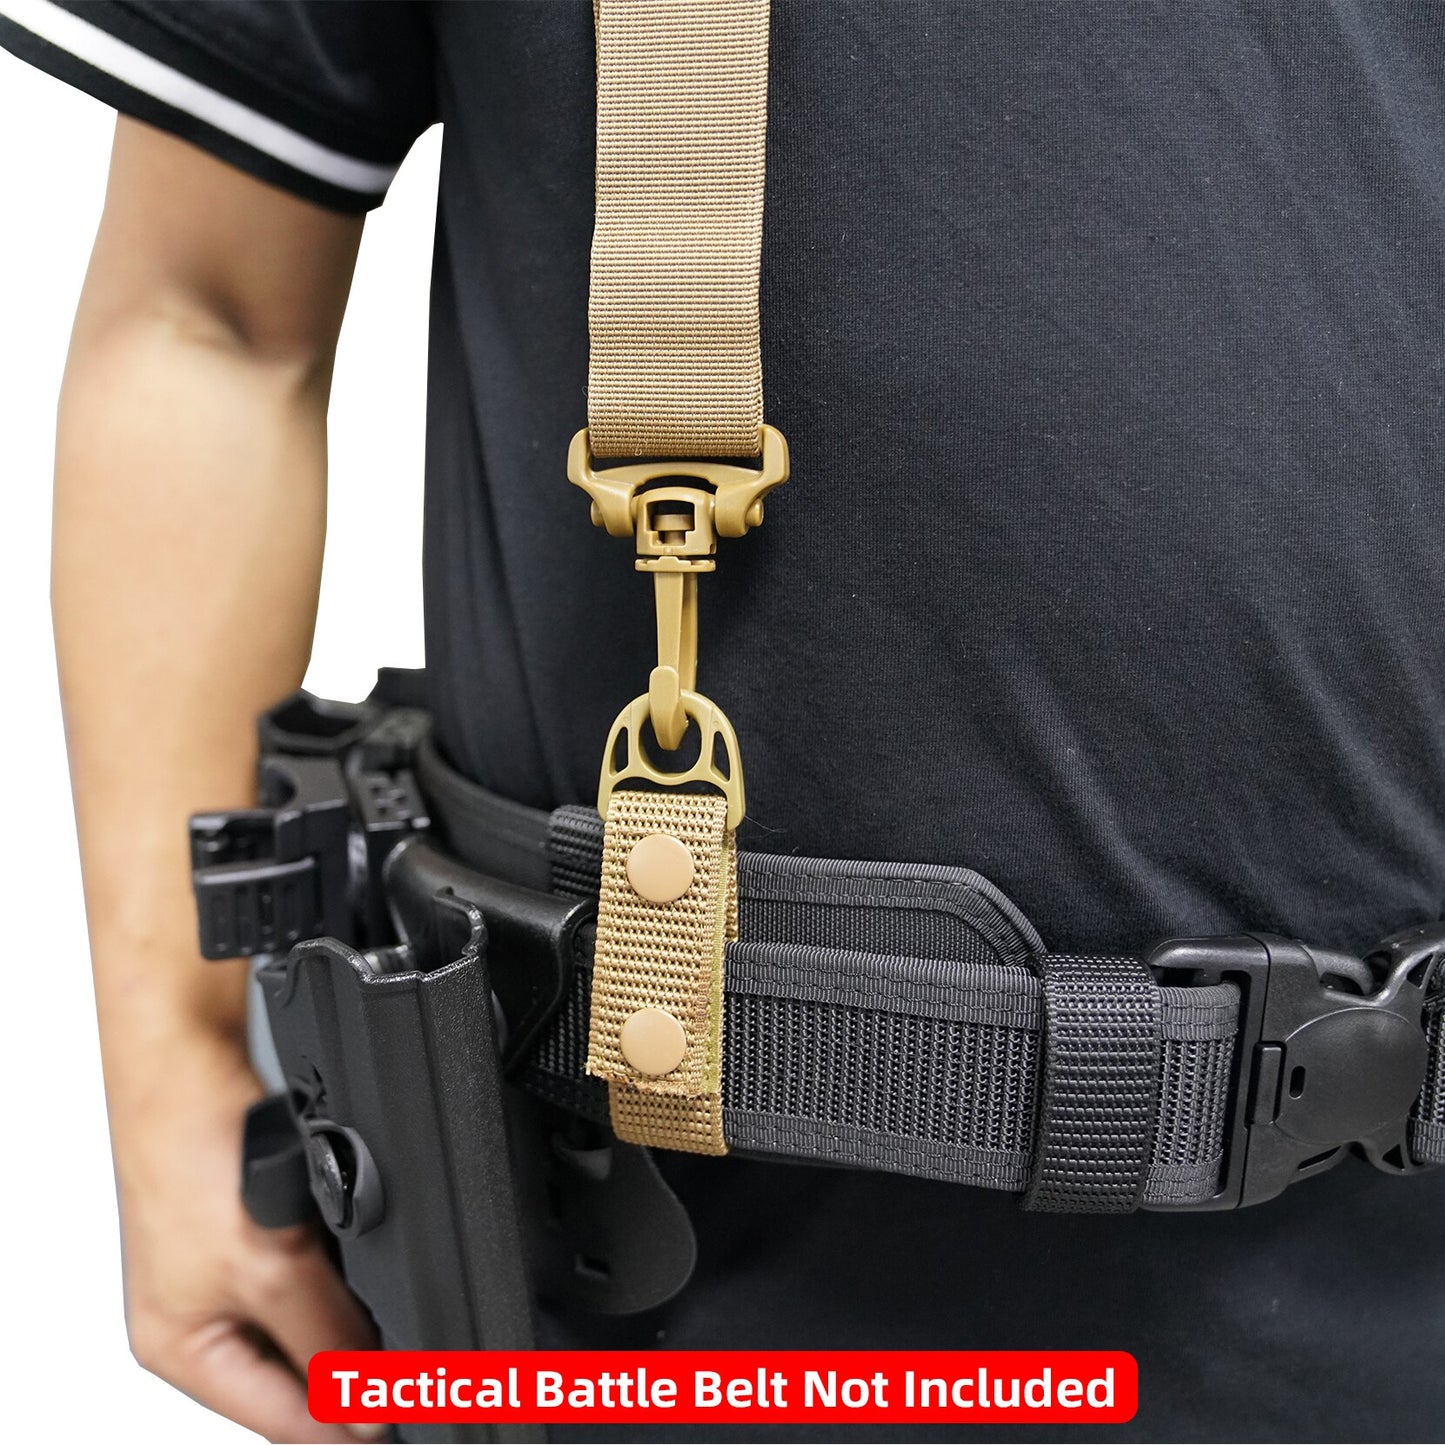 Melo Tough Tactical Harness Tactical Suspenders 1.5 inch Police Suspenders for Duty Belt